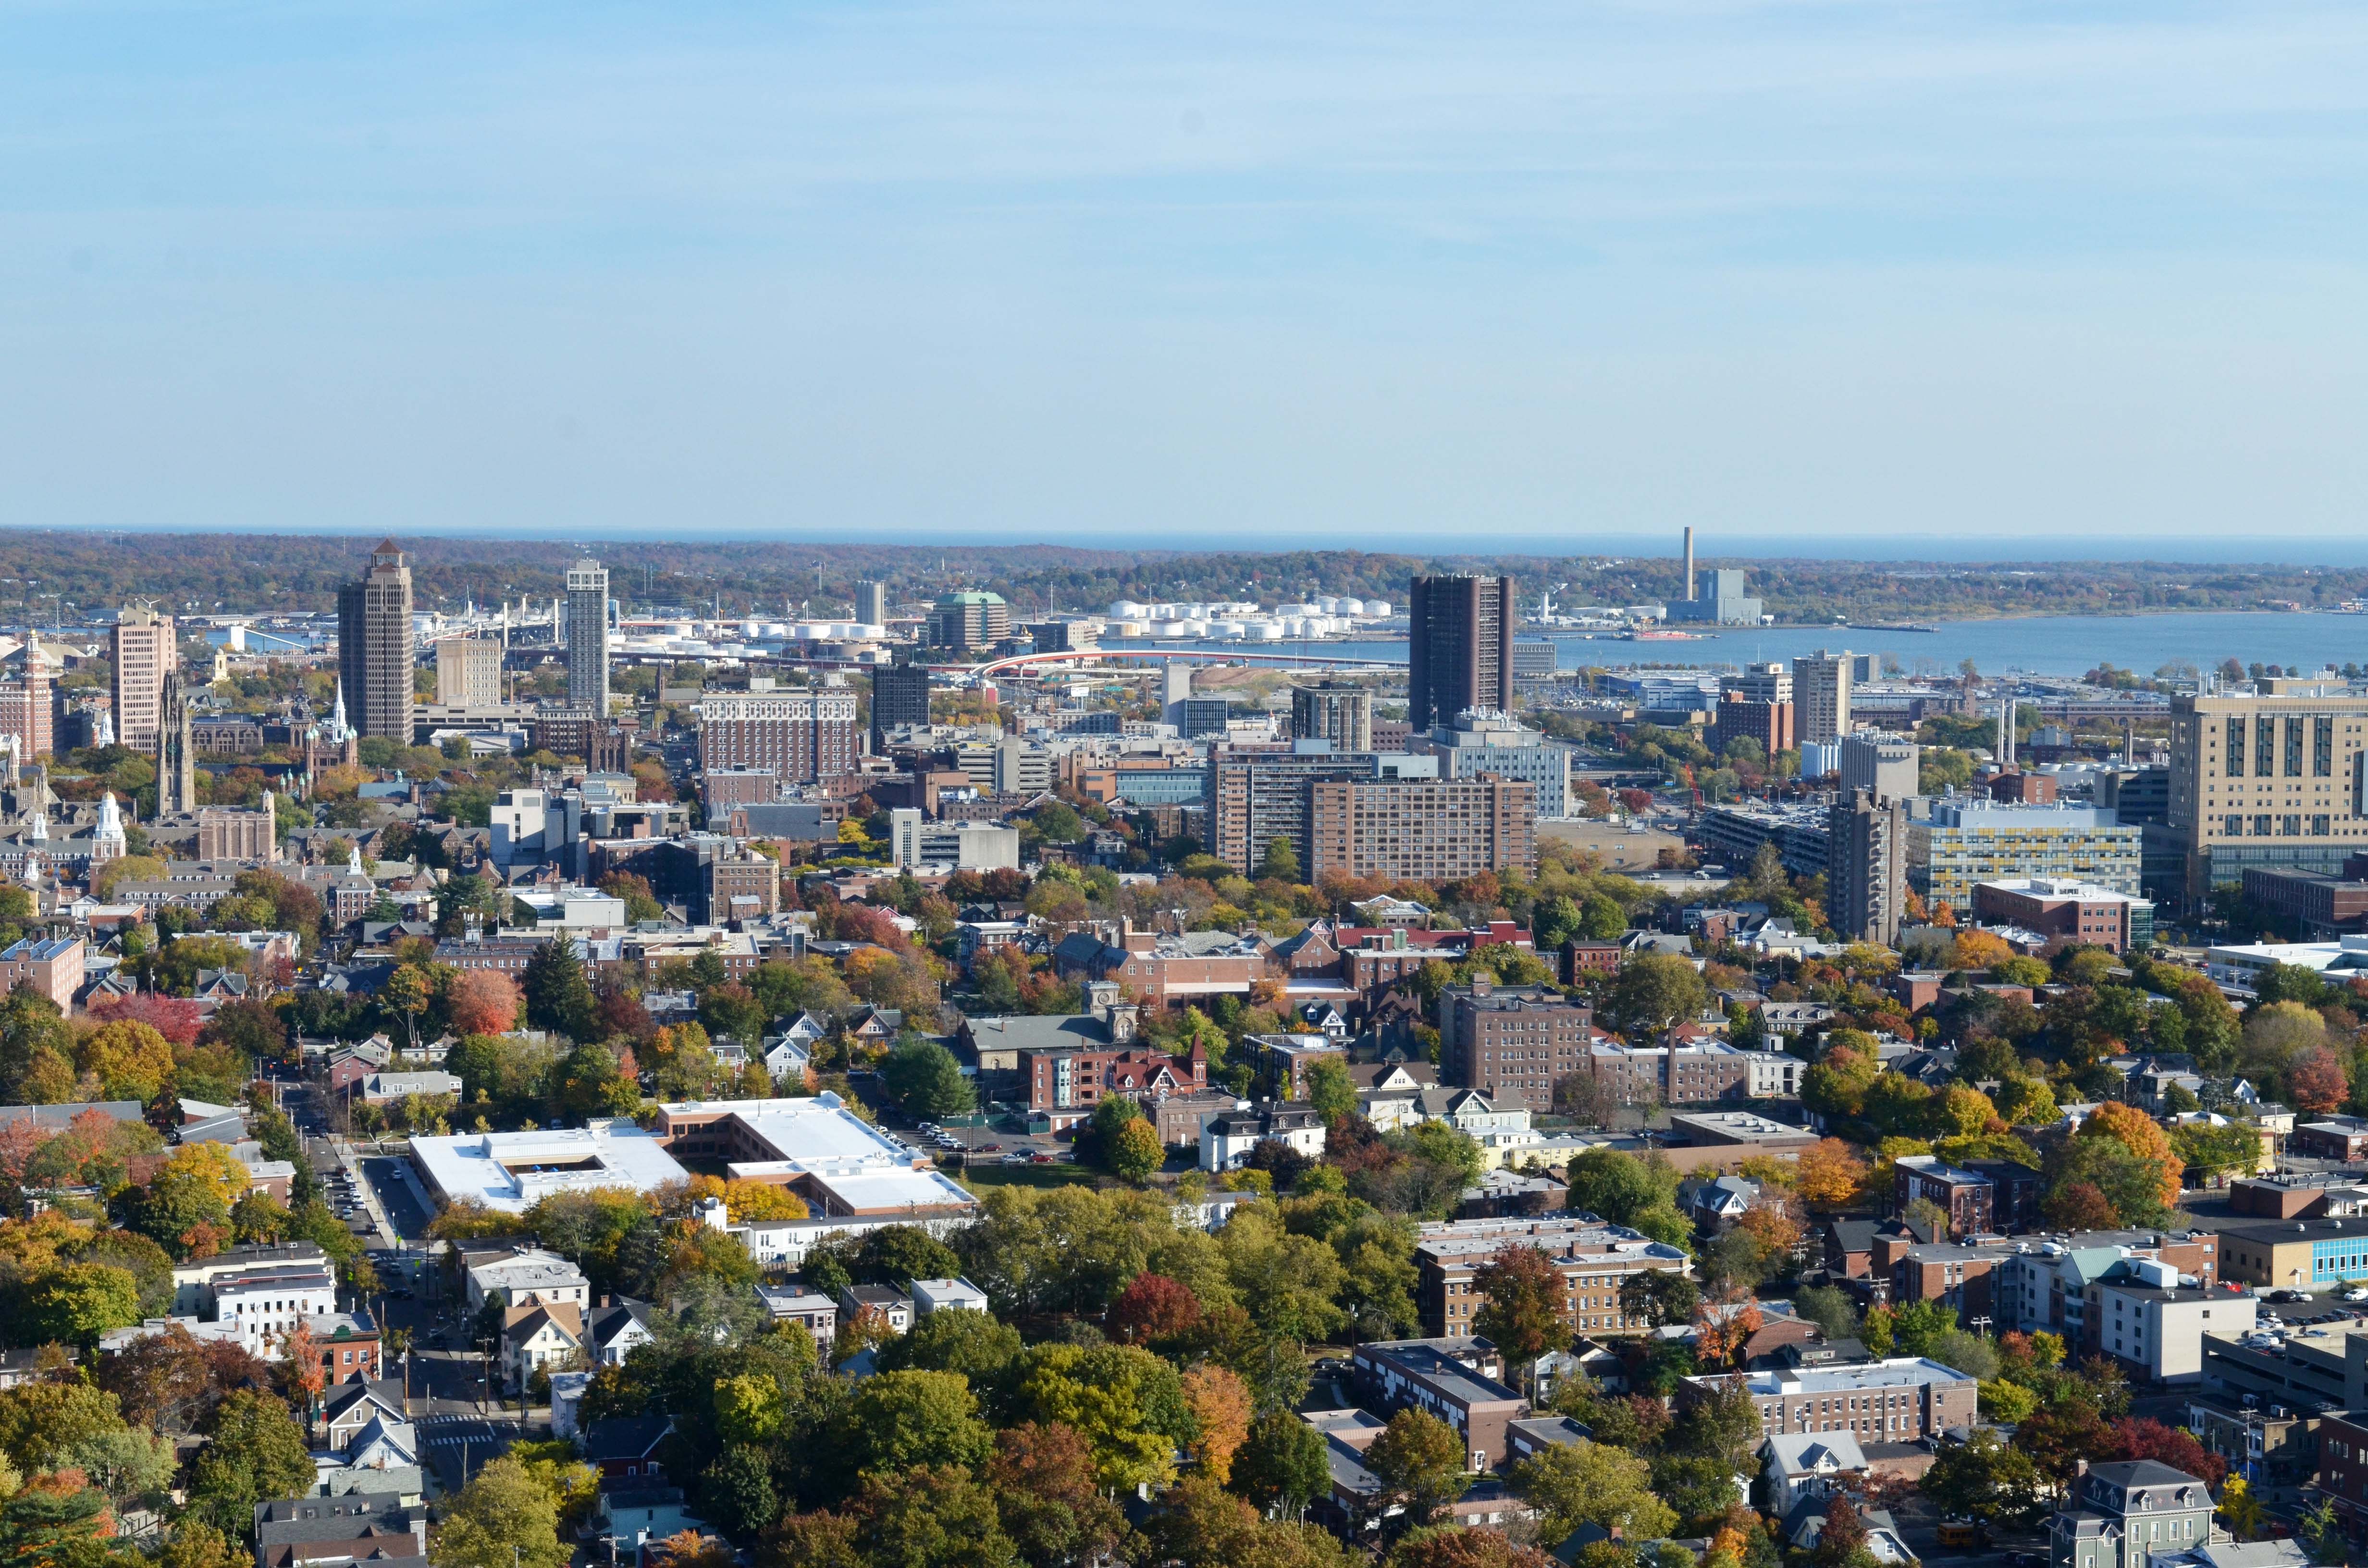 Aerial view of New Haven